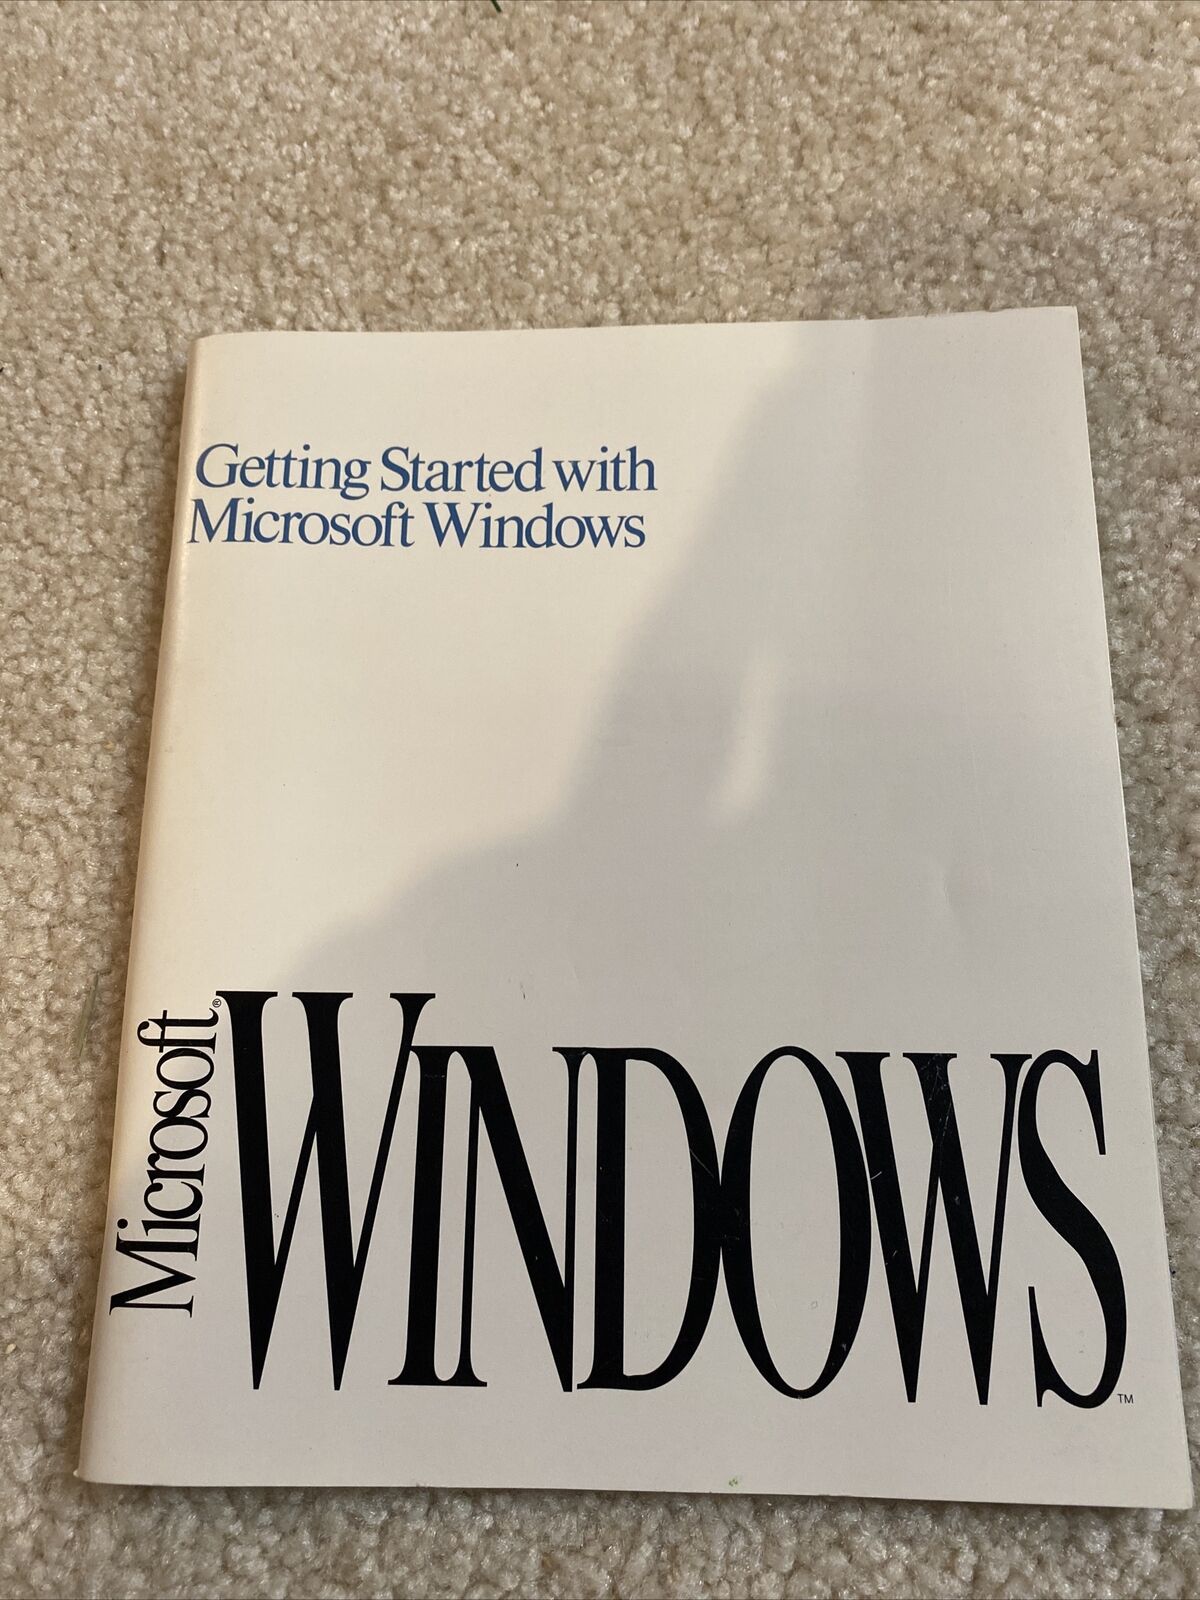 Getting Started with Microsoft Windows 3.1 User's Guide 1991 Genuine OEM Book